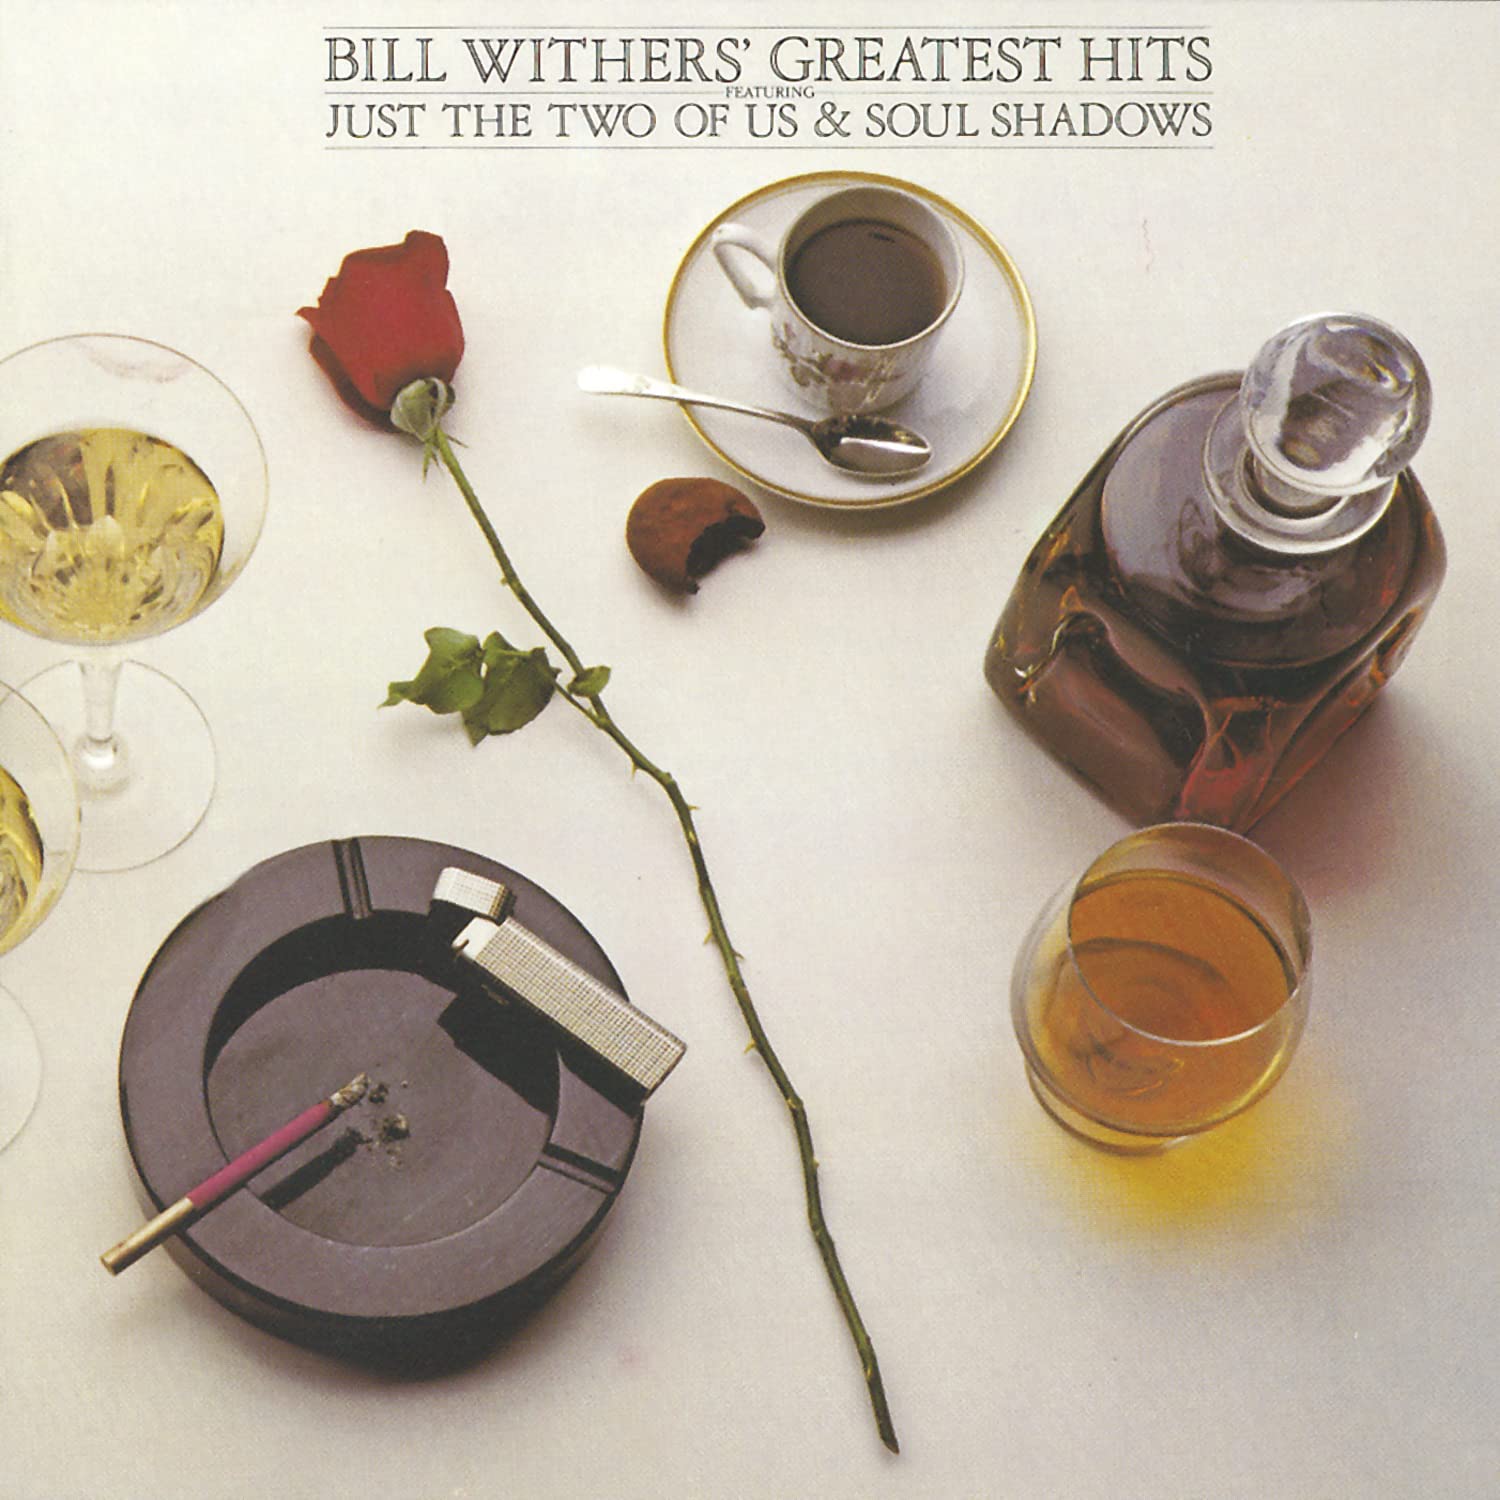 Withers, Bill: Greatest Hits (Vinyl LP)